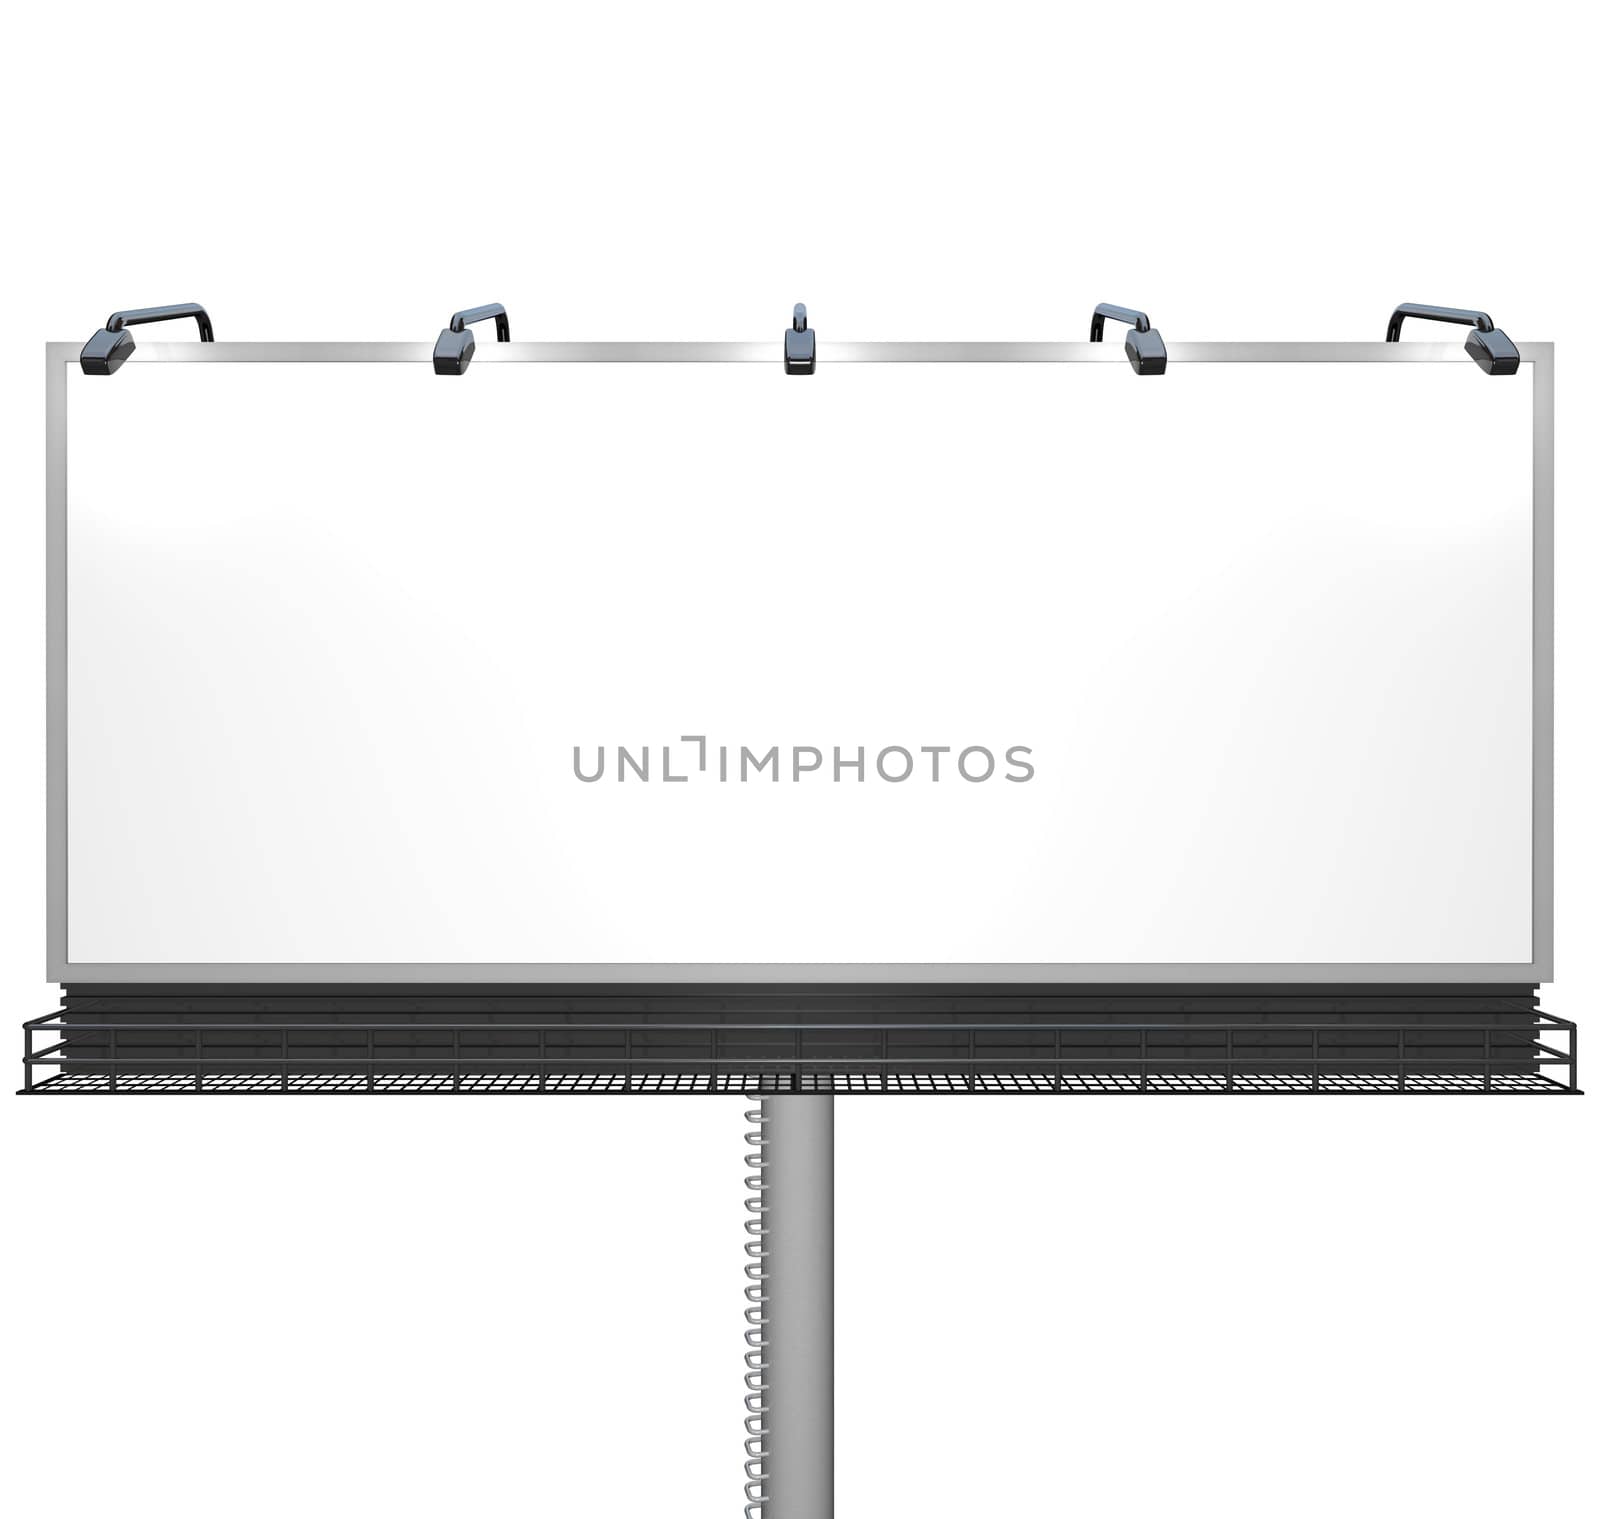 Here's a straight shot of a blank white billboard ready for you to place your own advertising message to grab attention and attract new customers